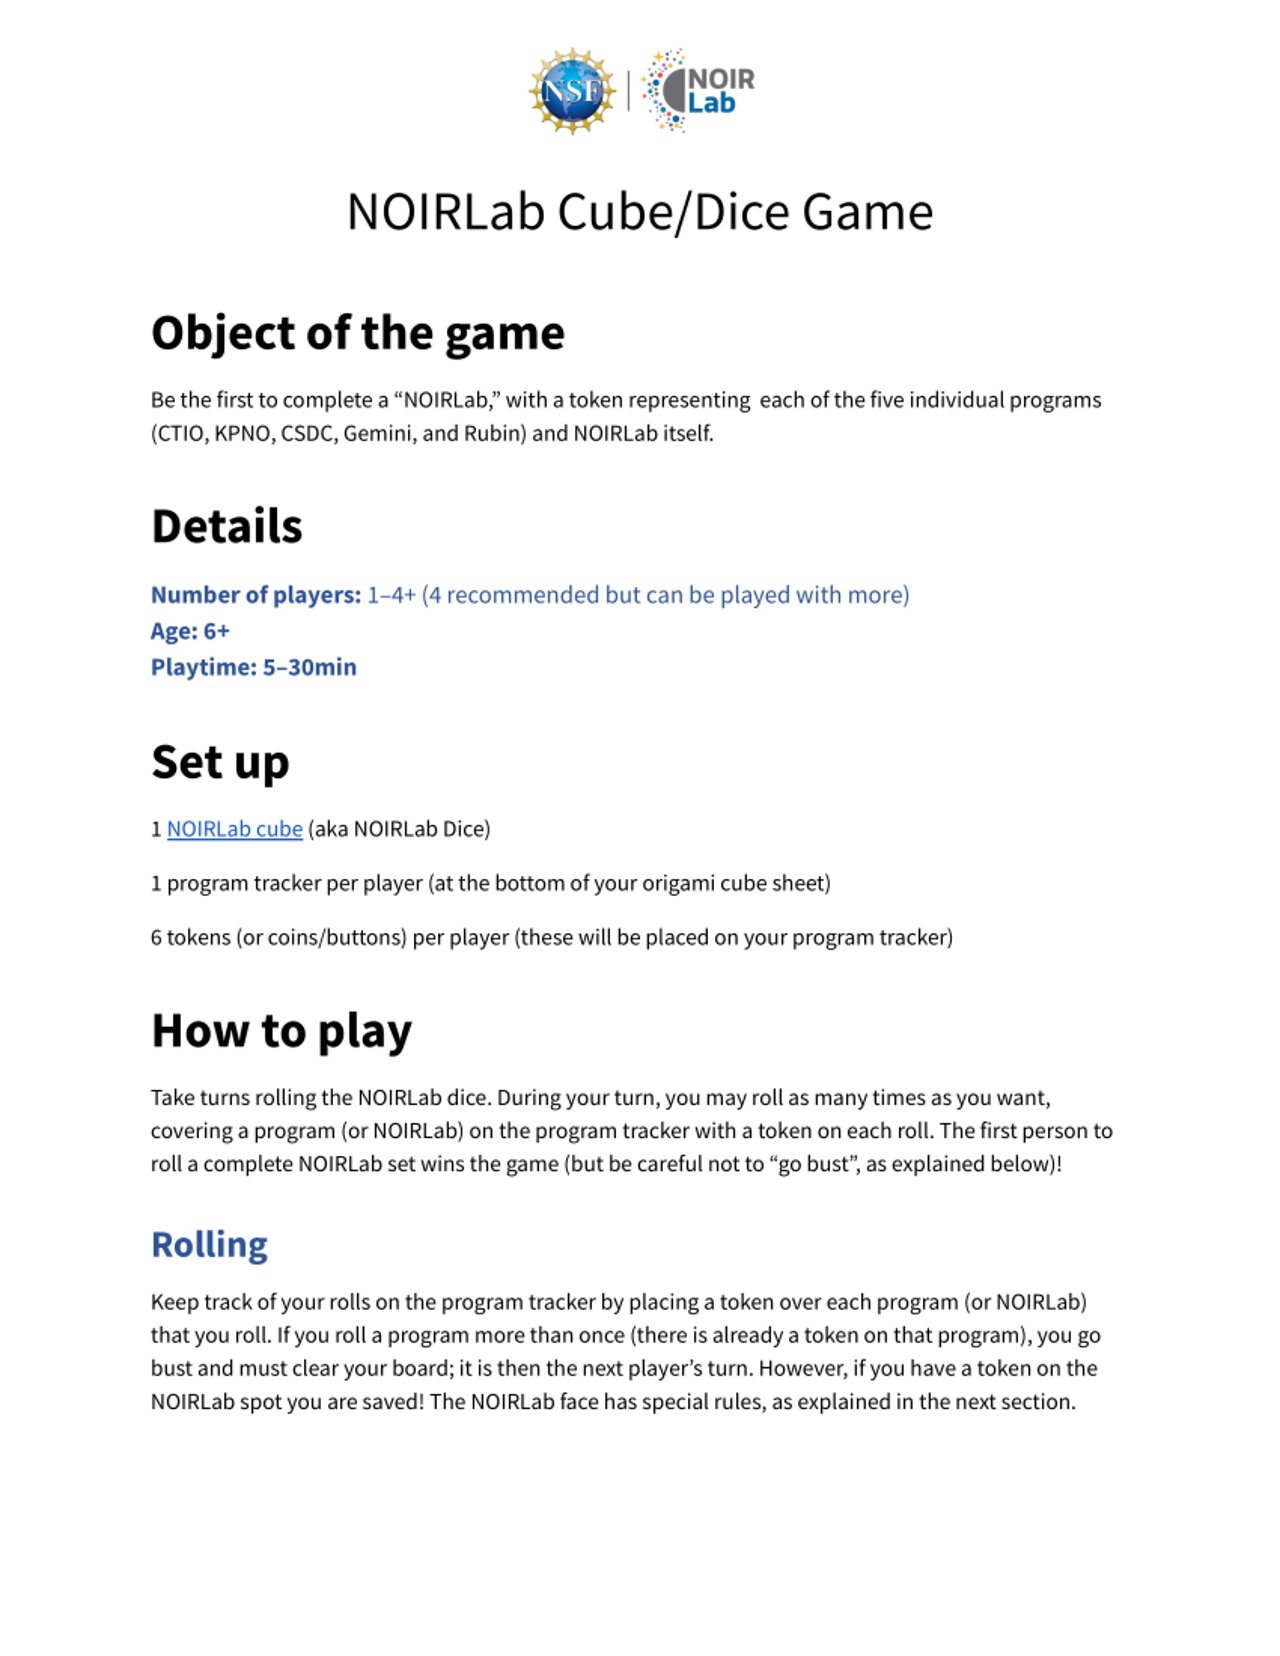 Technical Document: NOIRLab Cube/Dice Game